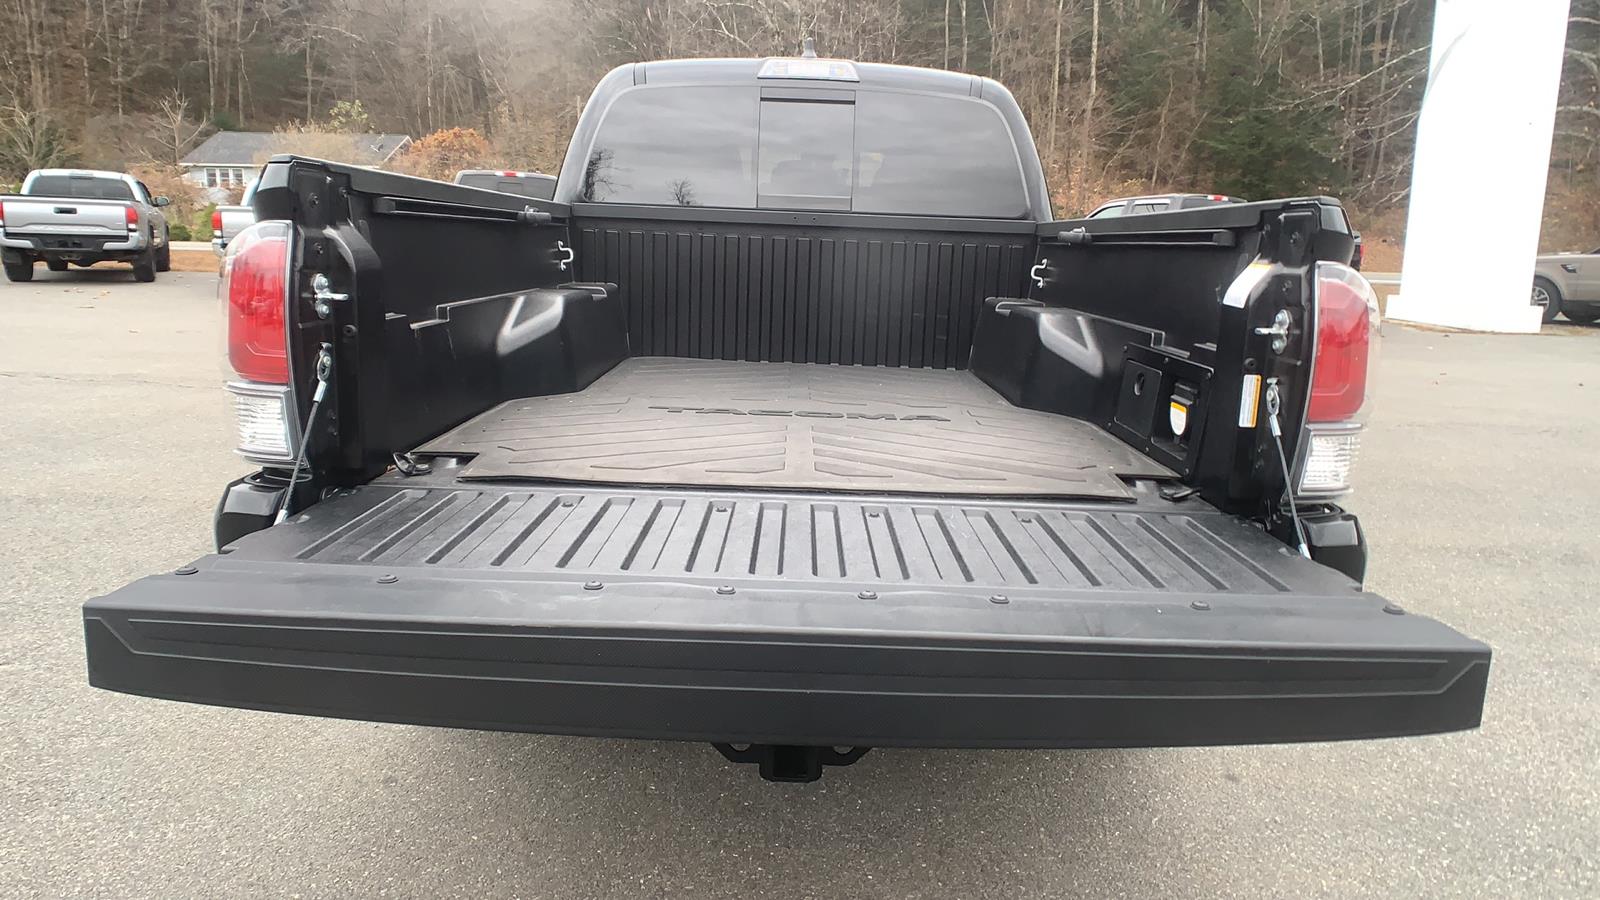 2022 Toyota Tacoma 2WD Short Bed